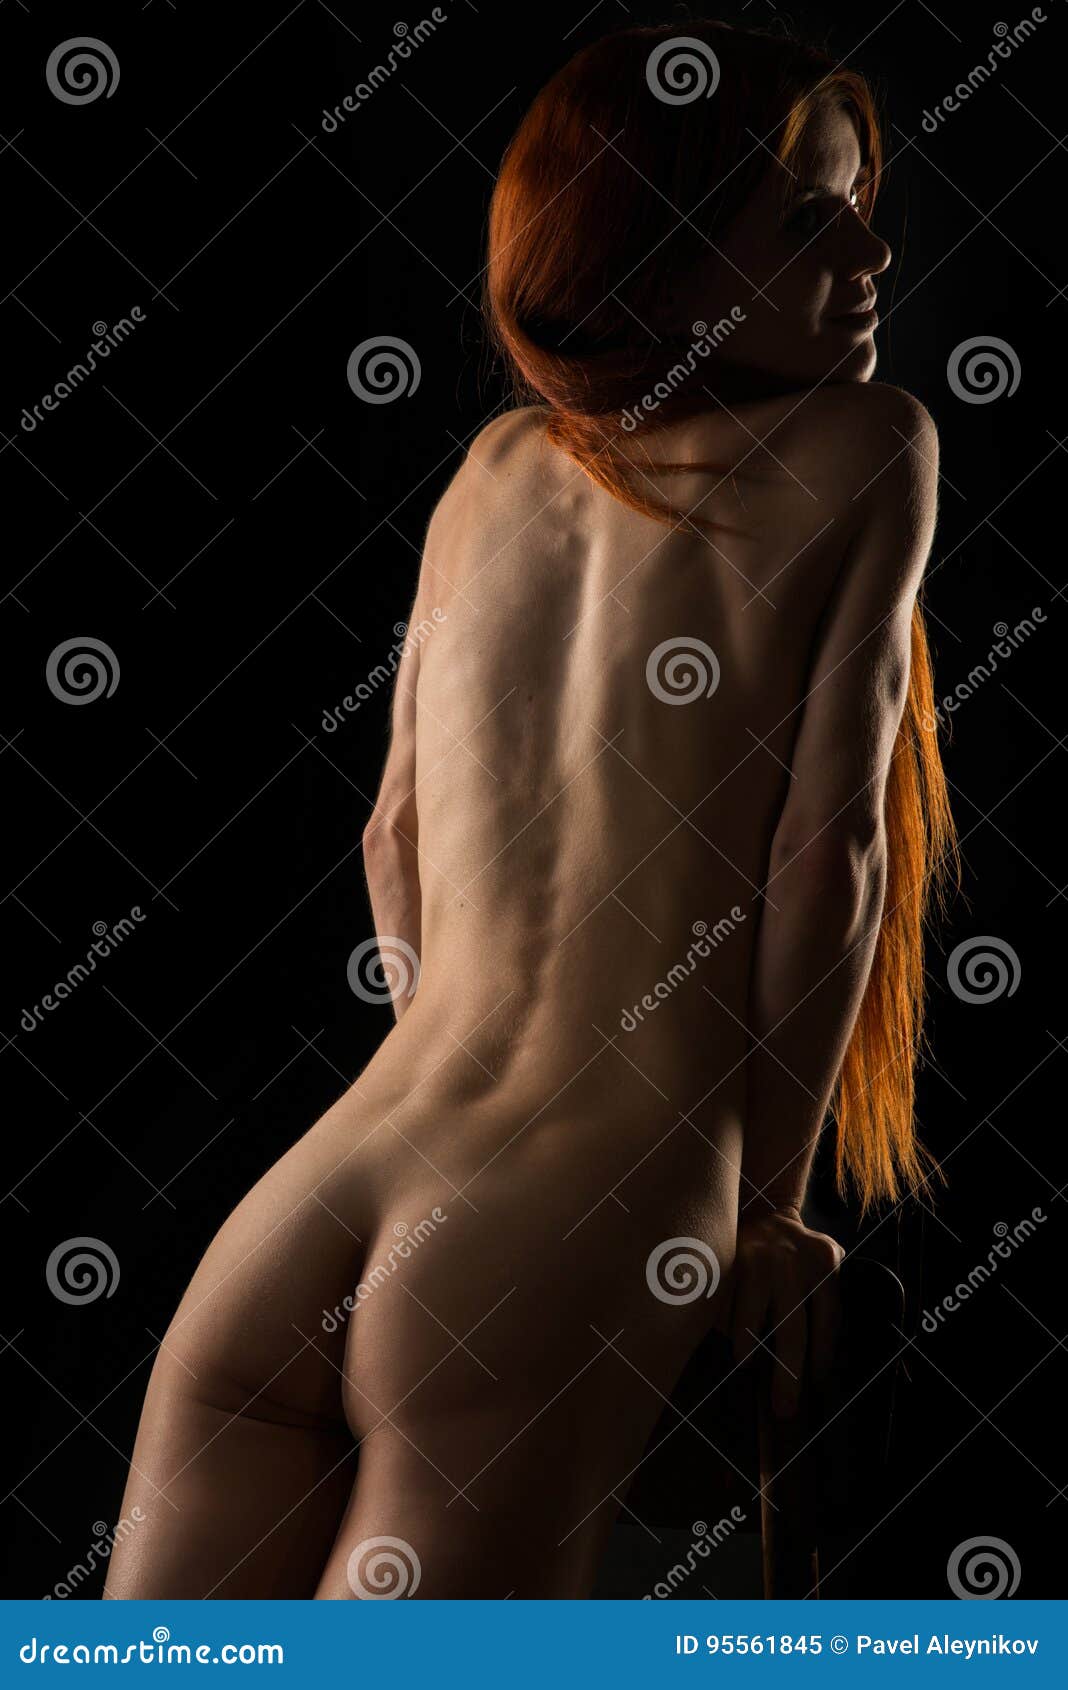 Red hair woman nude-porn pictures